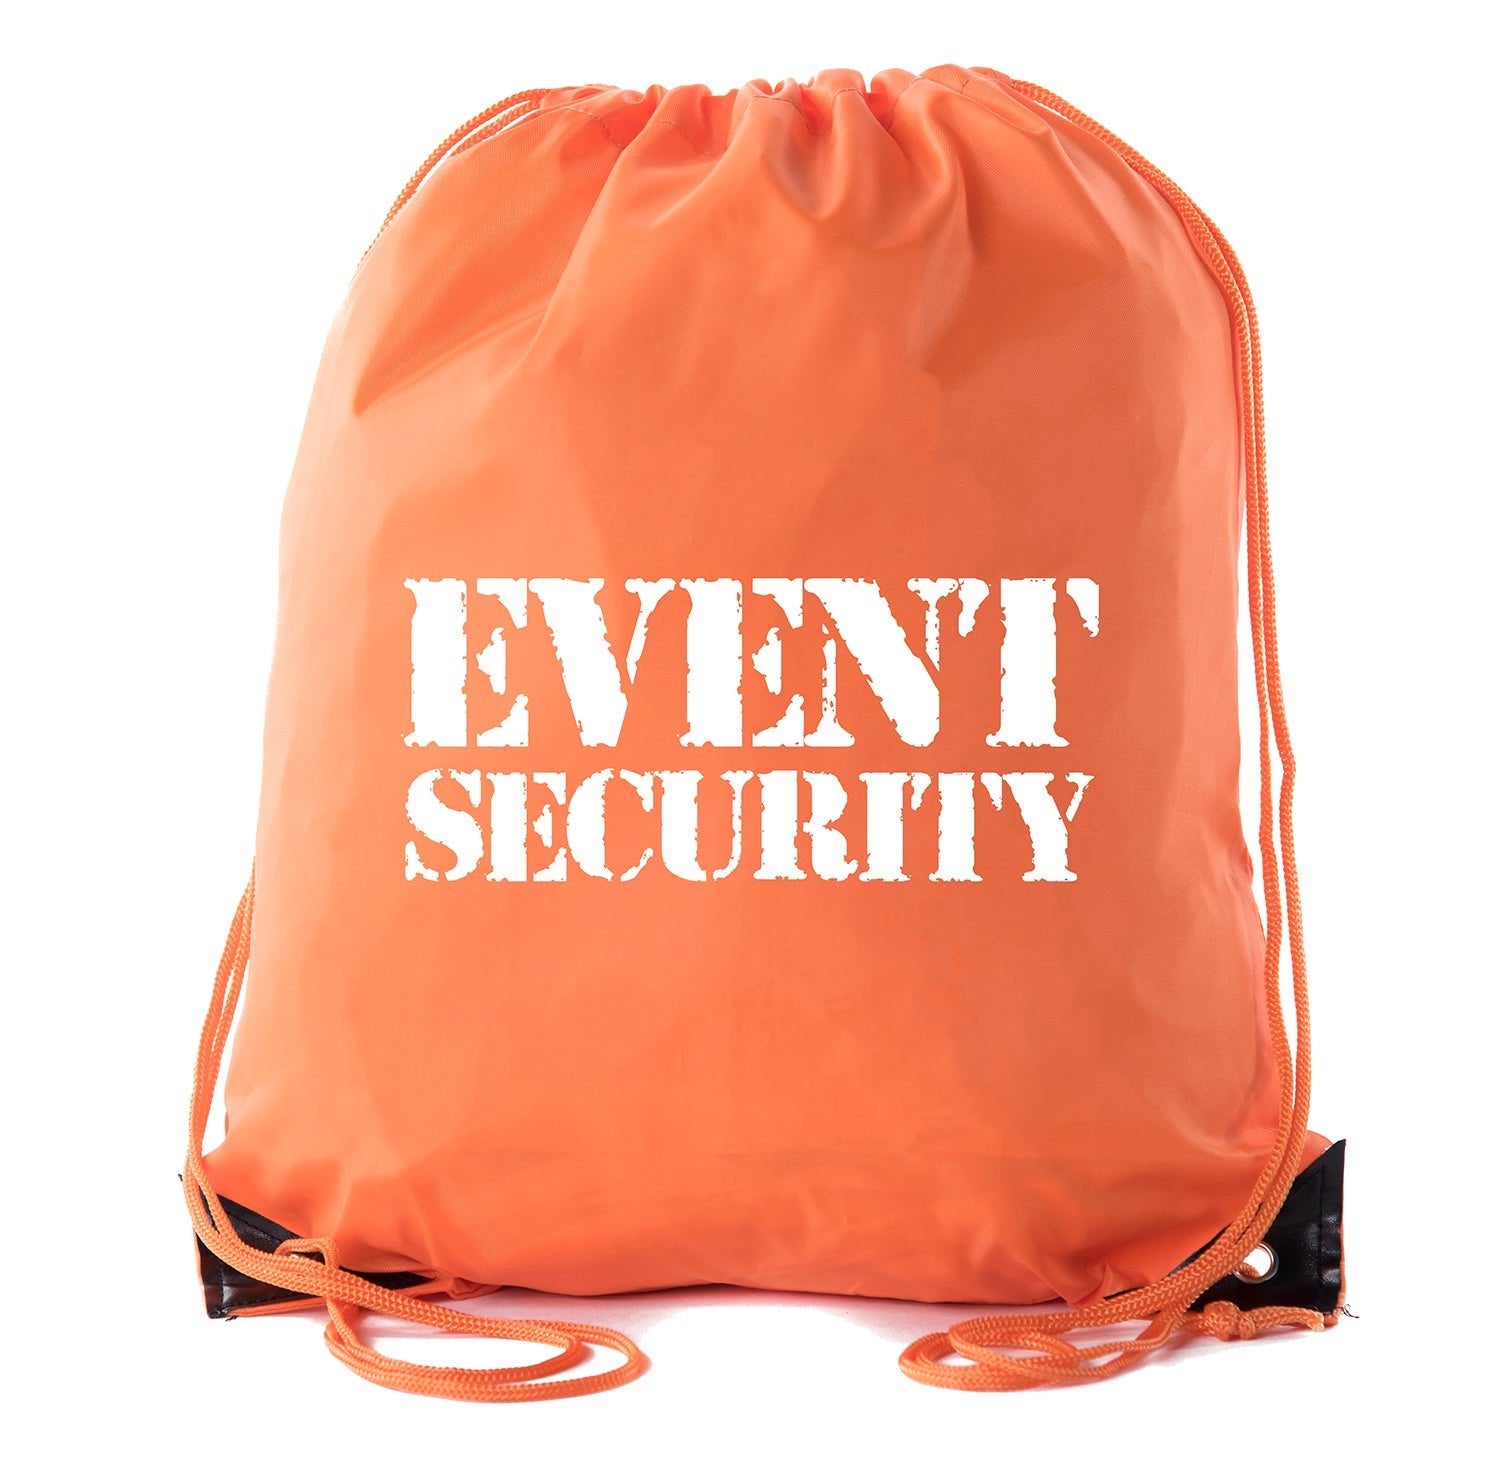 Event Security - Rough Text - Polyester Drawstring Bag - Mato & Hash